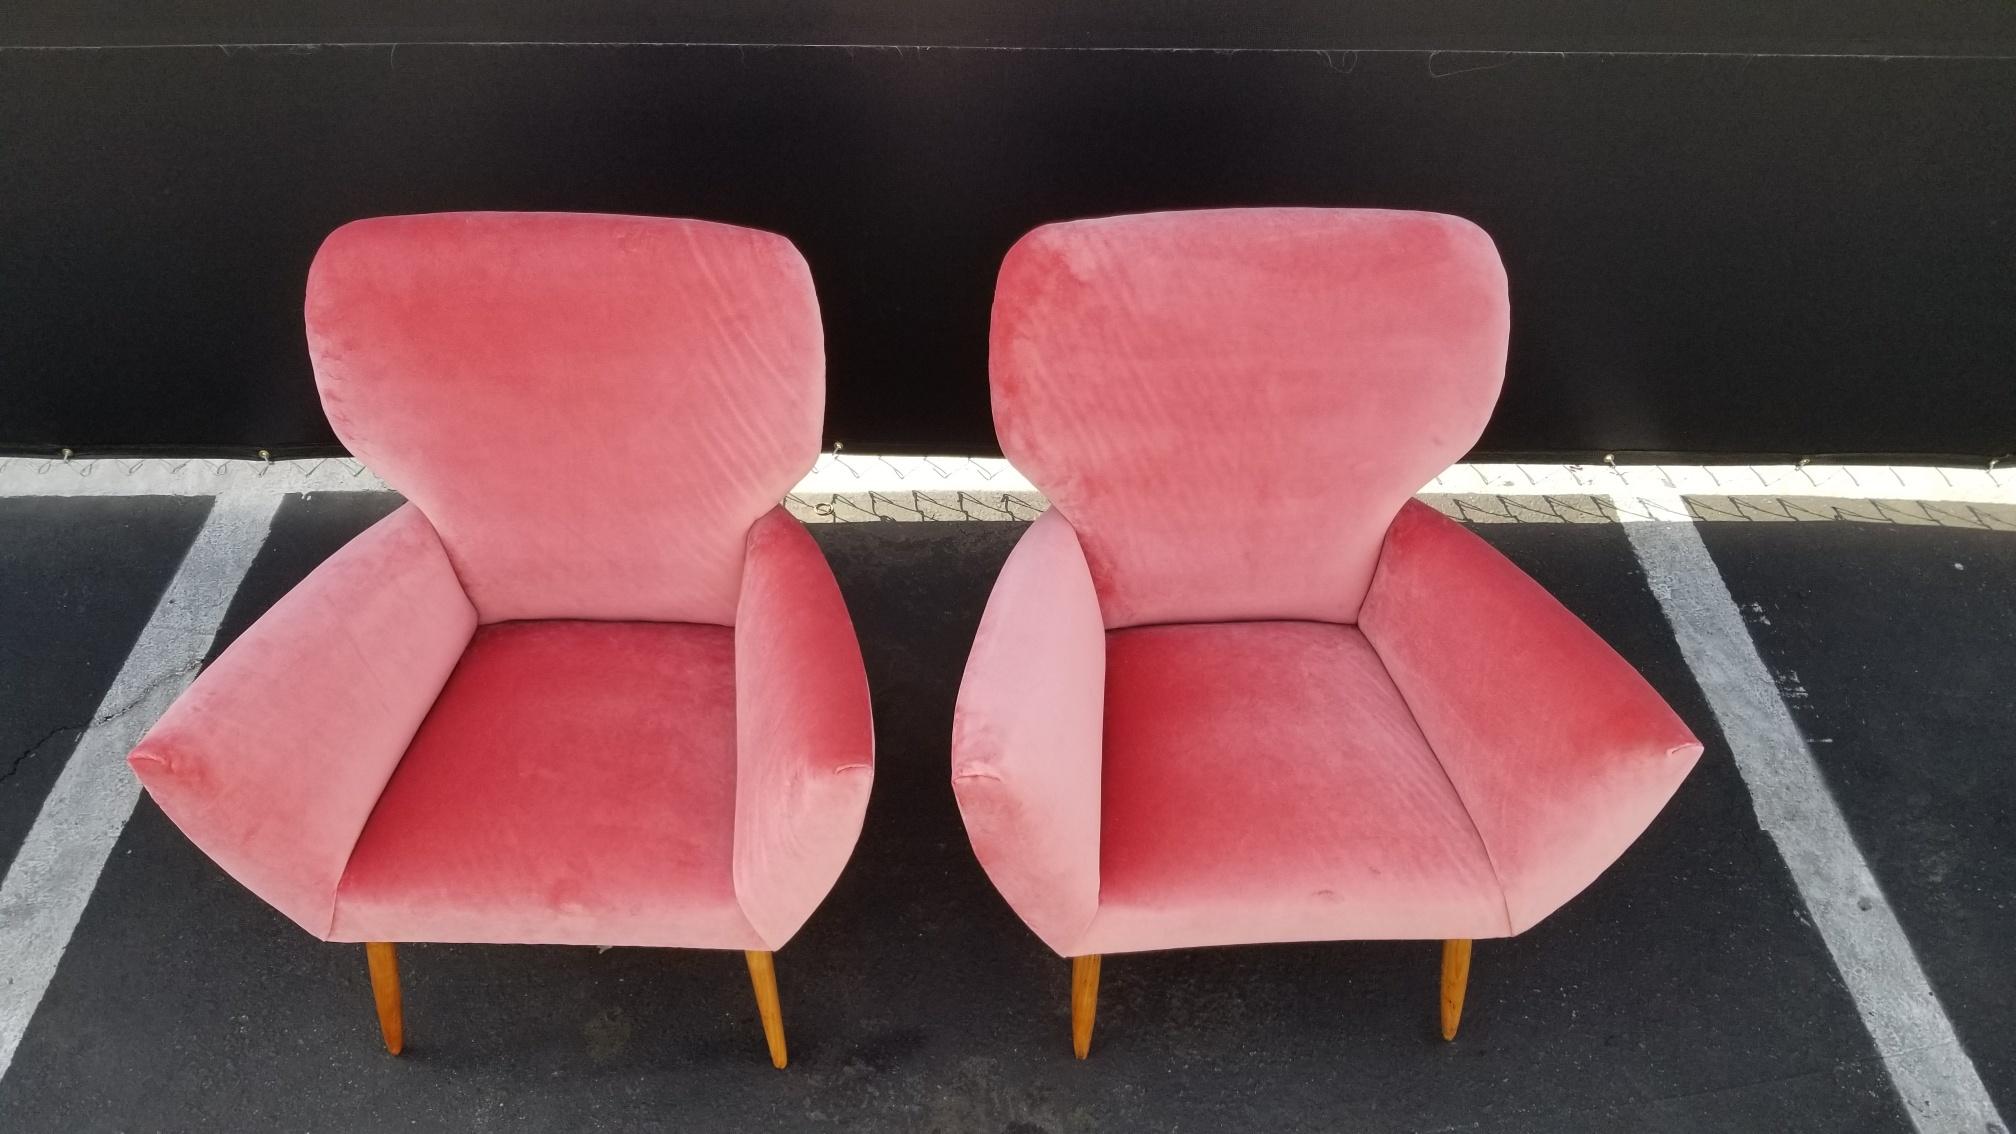 1950s midcentury wing chairs in style of Gio Ponti. Reupholster in new rose velvet.